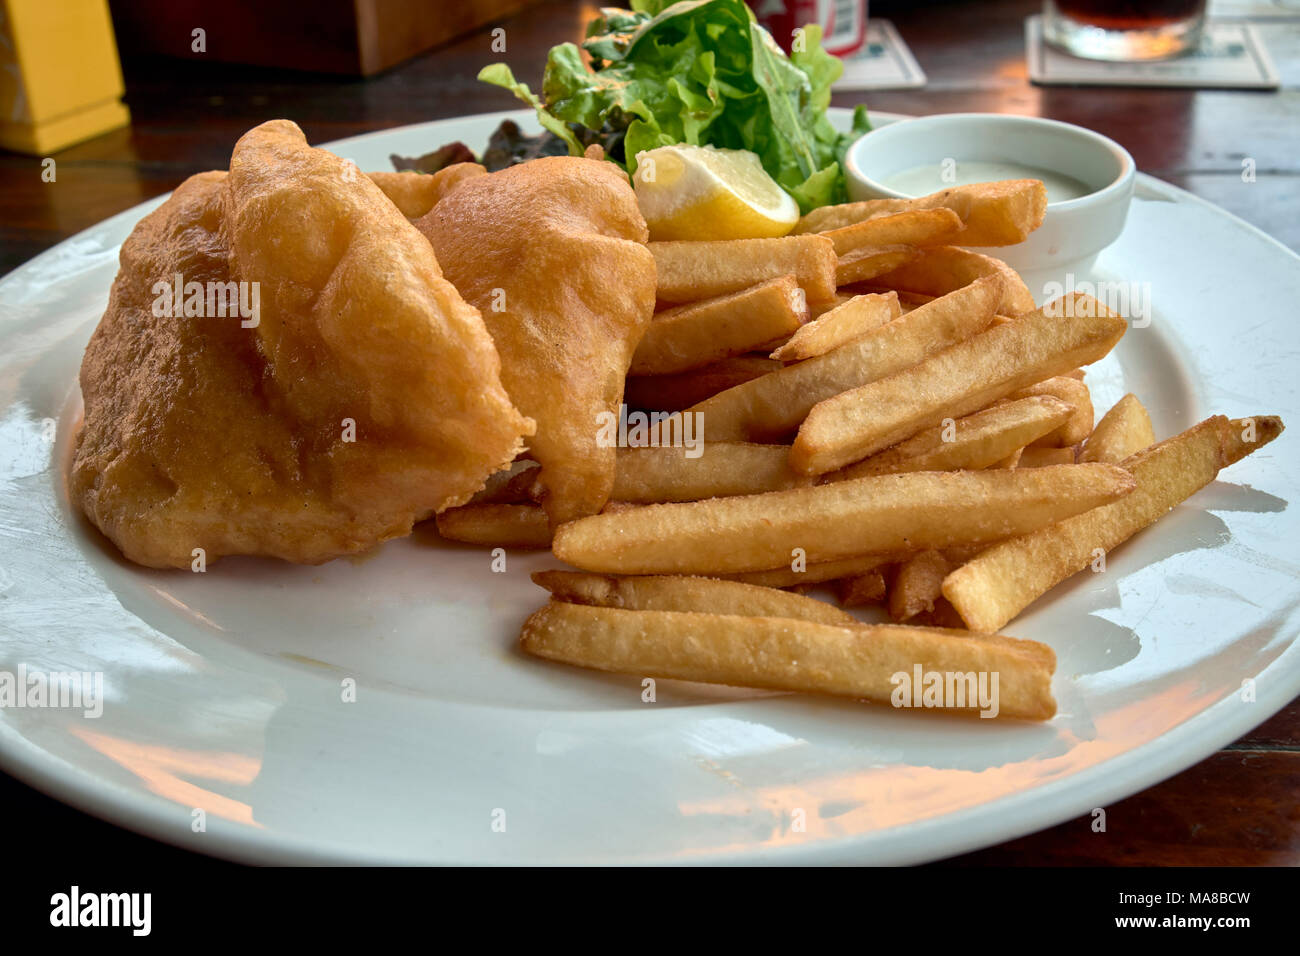 Fish and chips, fish n chips Stock Photo